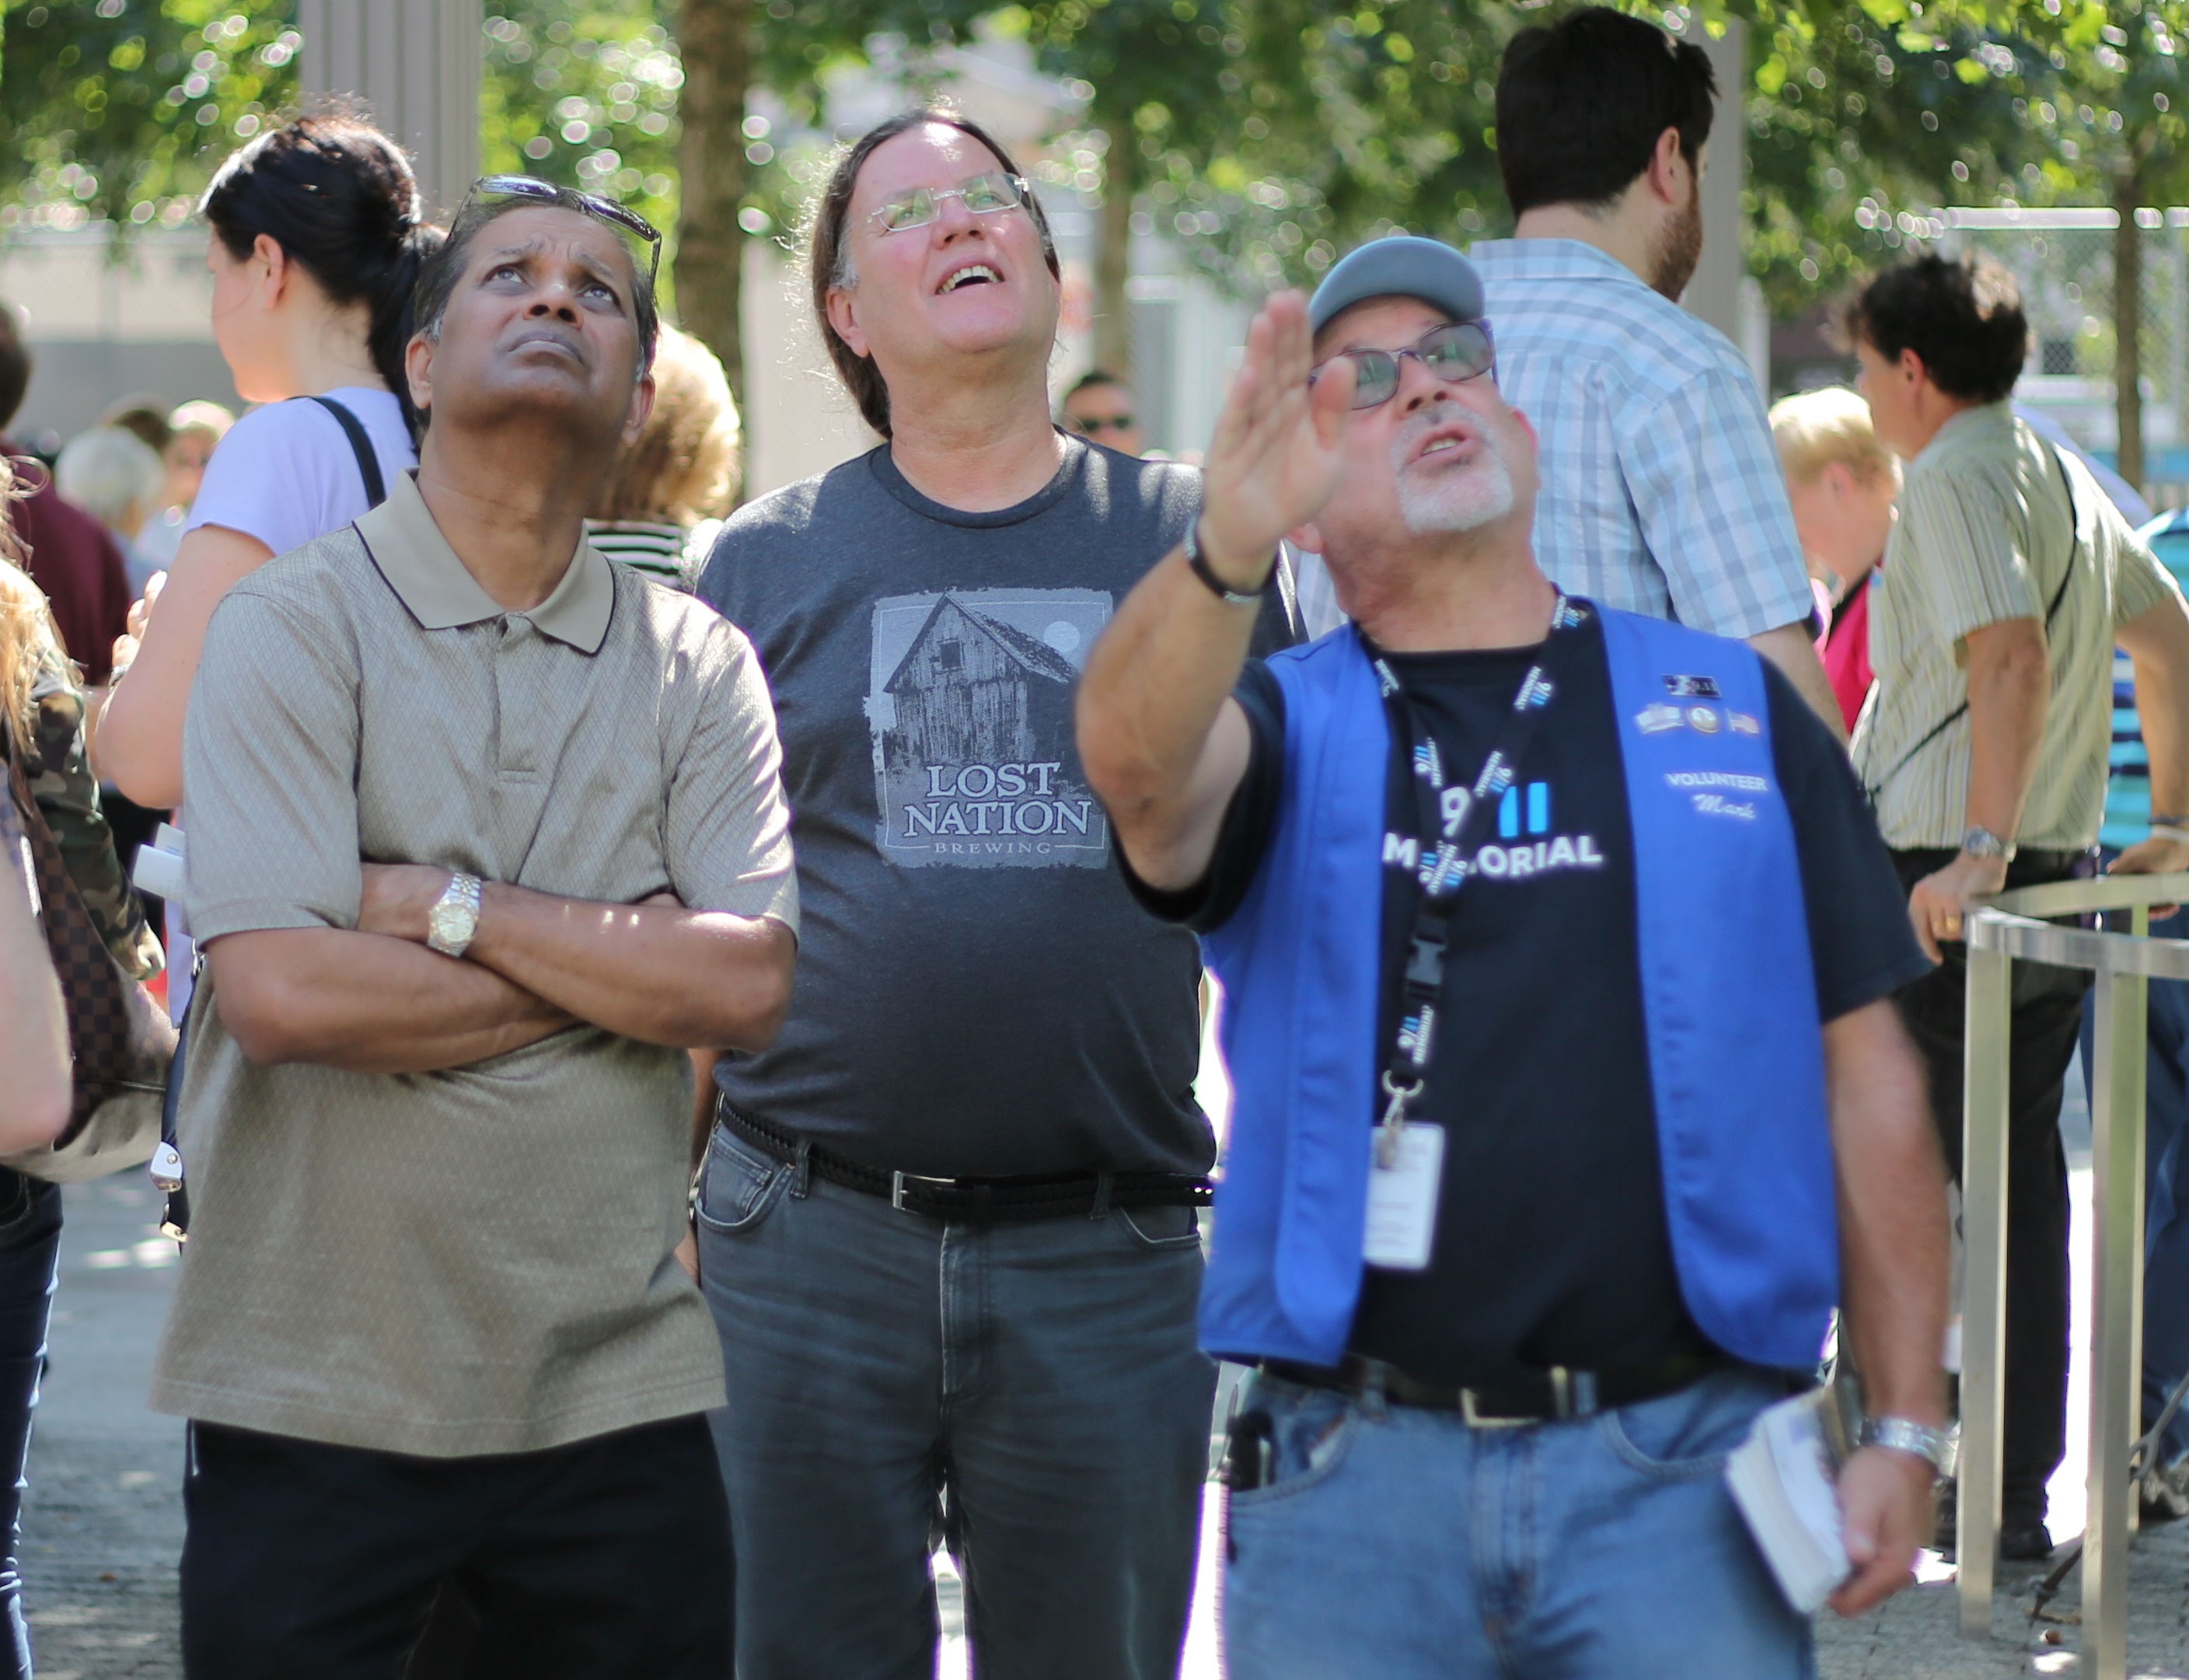 A tour guide wearing a blue vest and a black lanyard points his right arm at an object out of view. Two men beside him look up at the object.